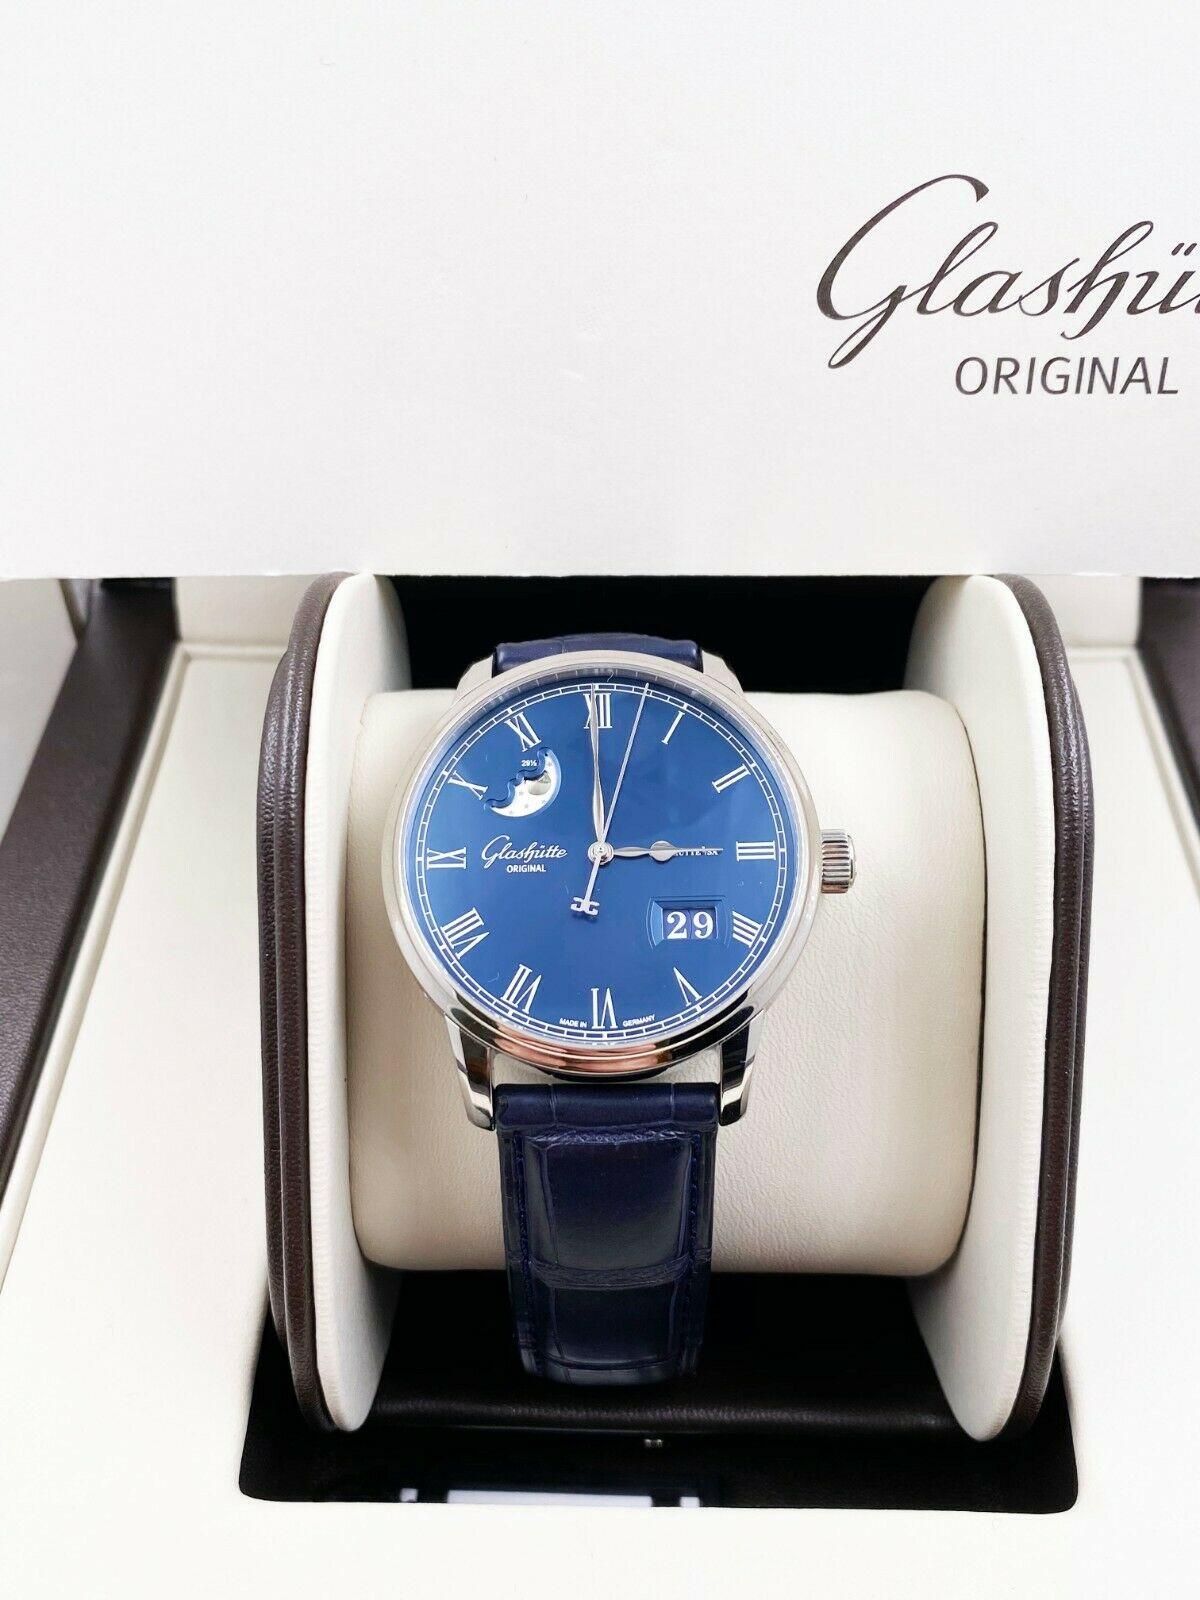 Style Number: 100-04-05-12-30

 

Model: Senator Panorama Moonphase

 

Case Material: Stainless Steel 

 

Band: Blue Leather 

 

Bezel:  Stainless Steel 

 

Dial: Blue 

 

Face: Sapphire Crystal 

 

Case Size: 40mm

 

Includes: 

-Glashuette